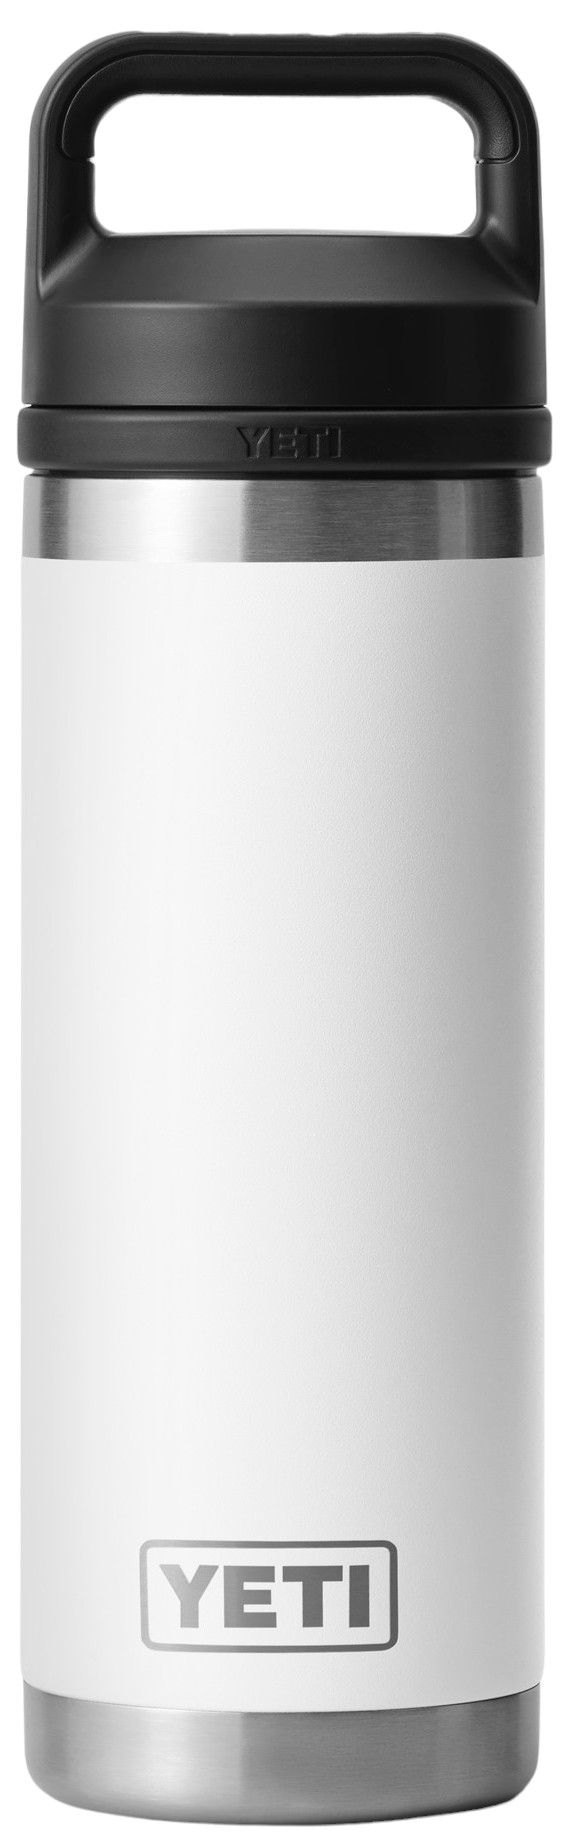 Owala FreeSip Stainless Steel Water Bottle - 32oz - Al's Sporting Goods:  Your One-Stop Shop for Outdoor Sports Gear & Apparel